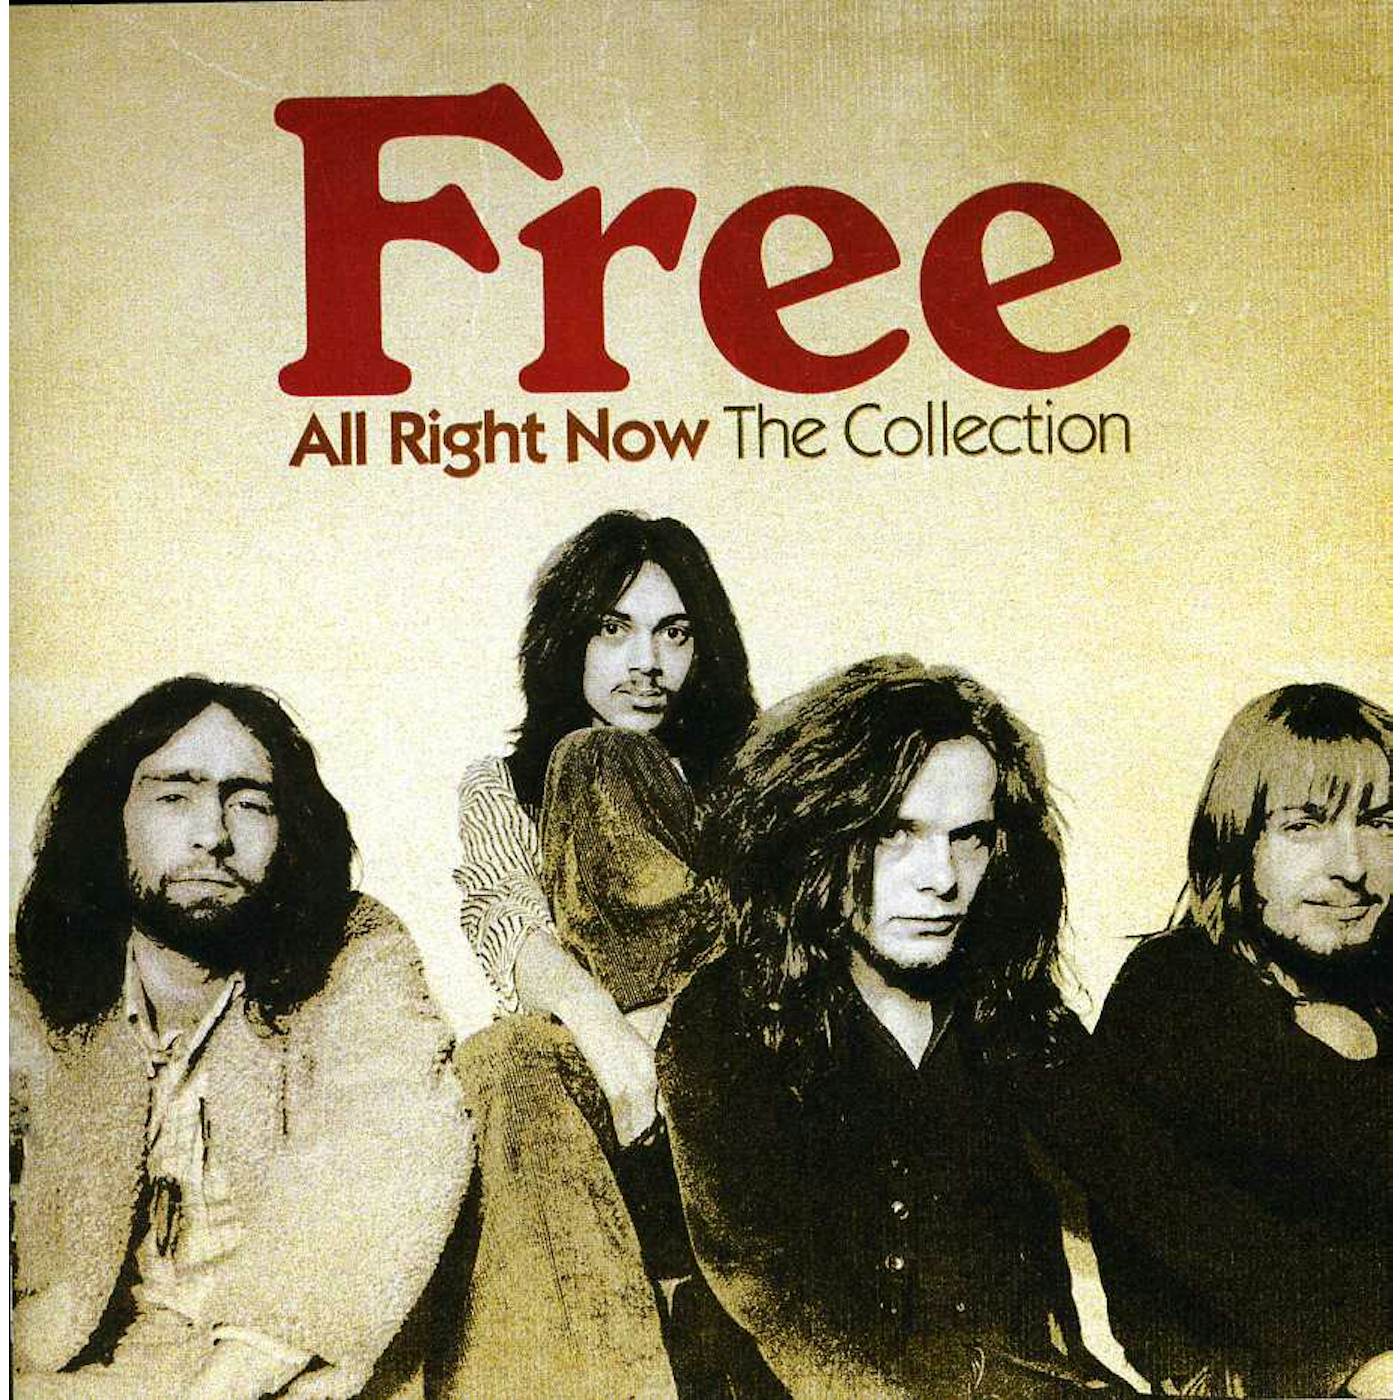 Free ALL RIGHT NOW: COLLECTION CD